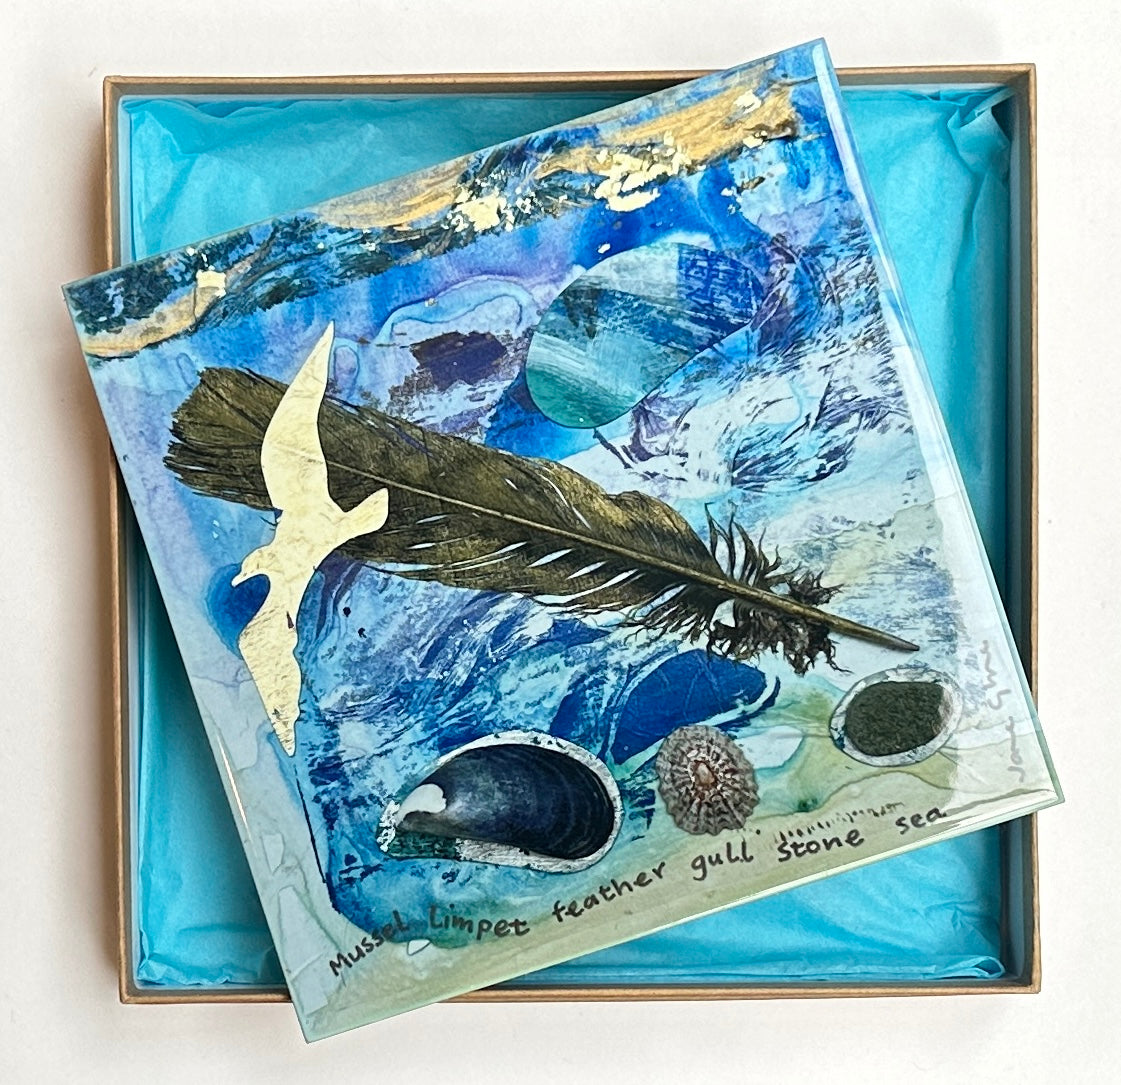 Large ceramic tile/Mussel Limpet feather gull stone sea